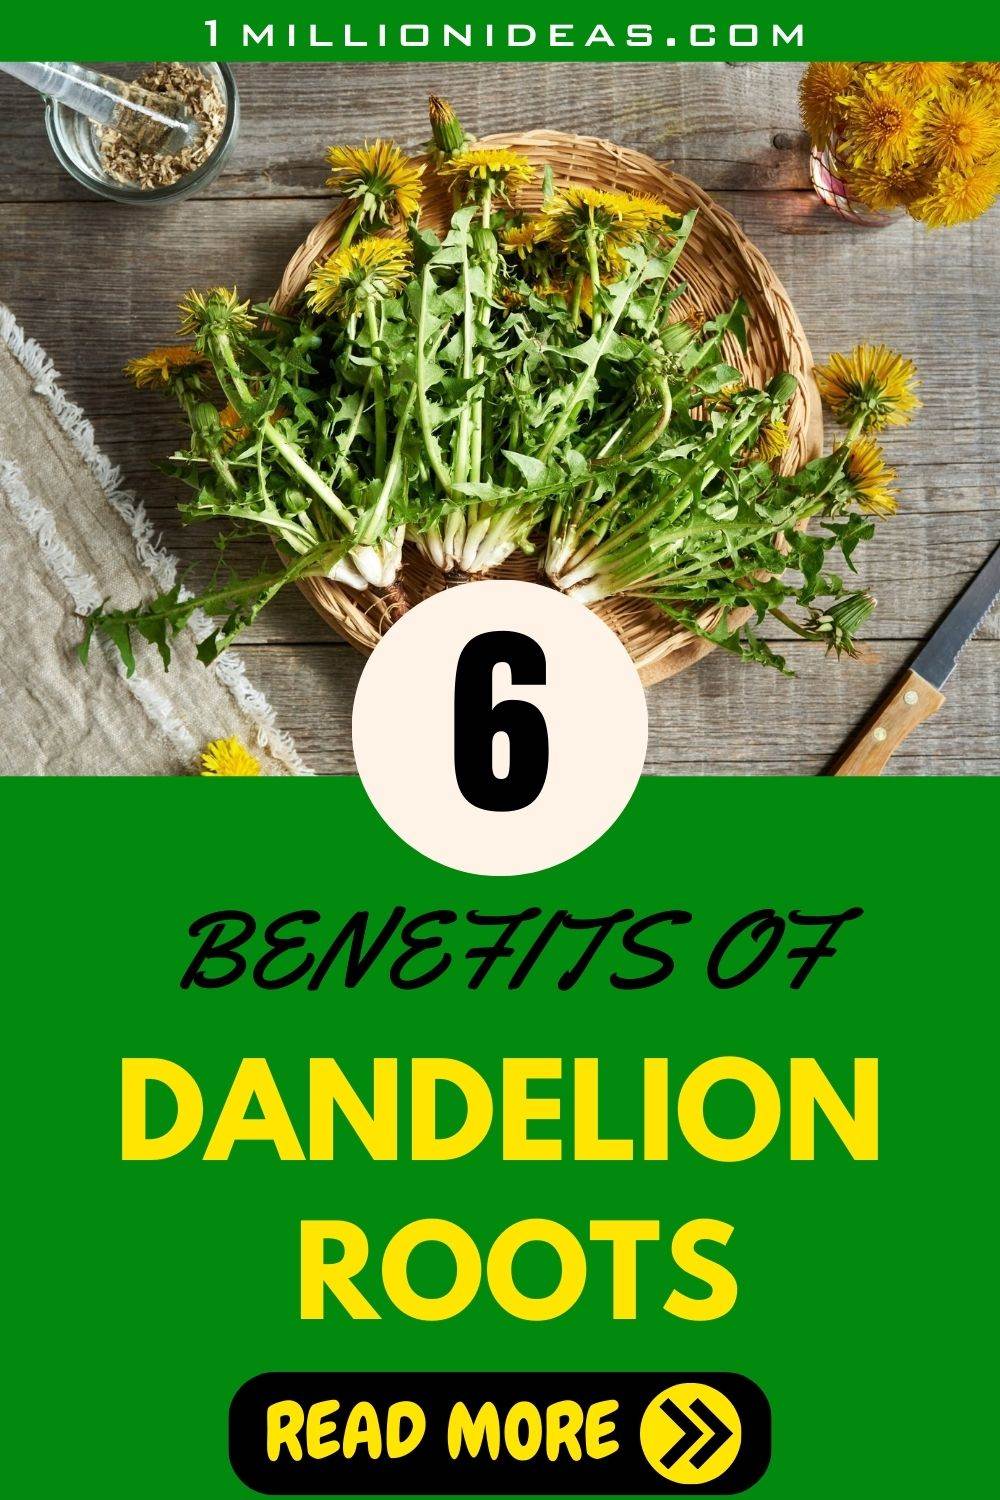 6 Amazing Benefits Of Dandelion Roots For Your Garden And Your Body - 47